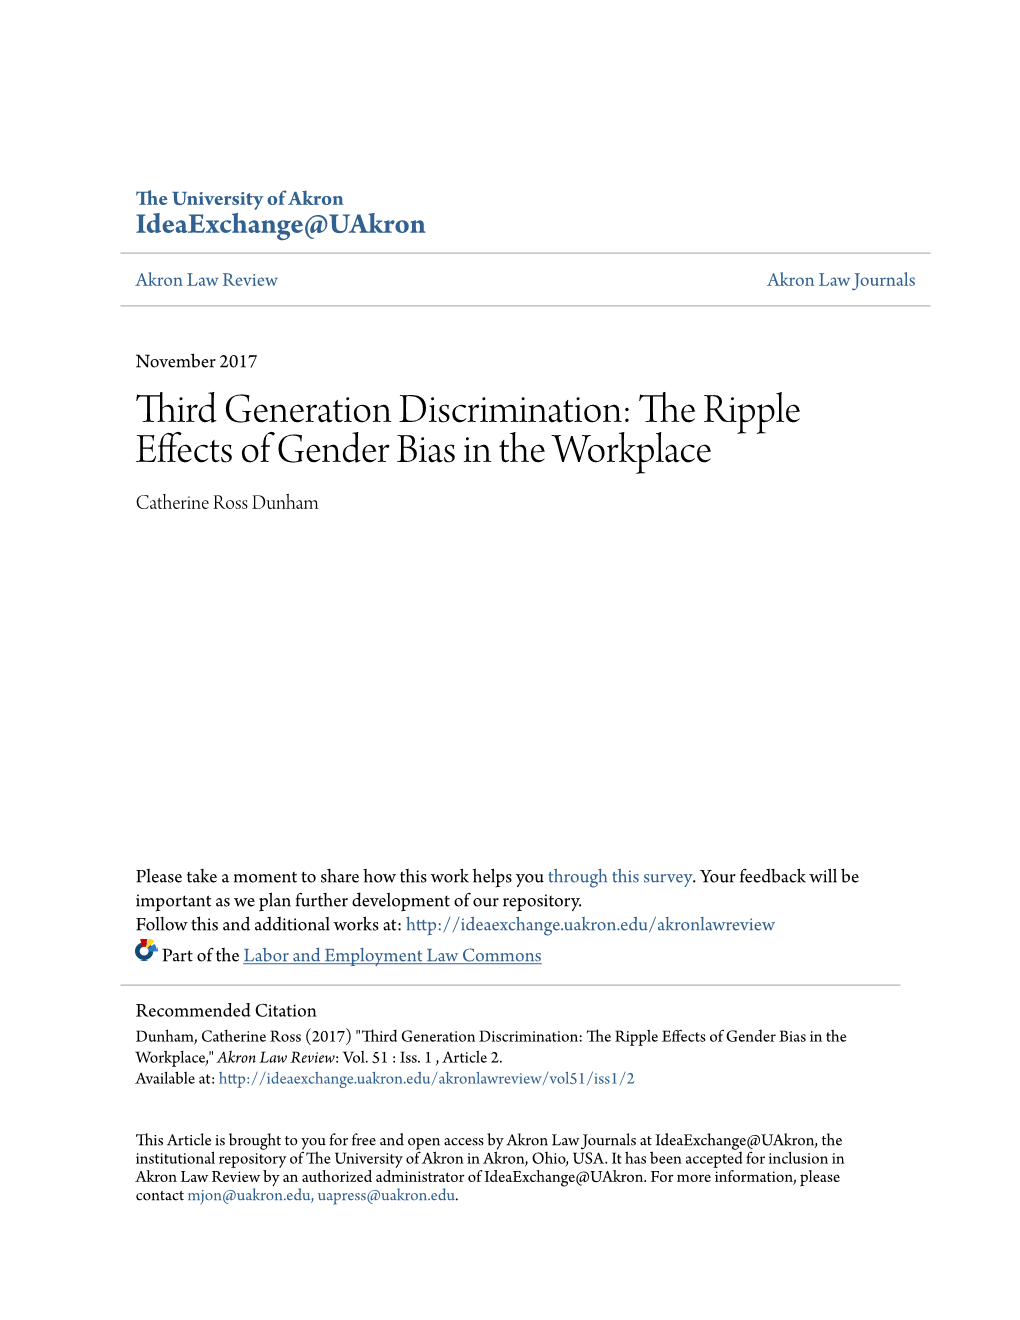 Third Generation Discrimination: the Ripple Effects of Gender Bias in the Workplace Catherine Ross Dunham